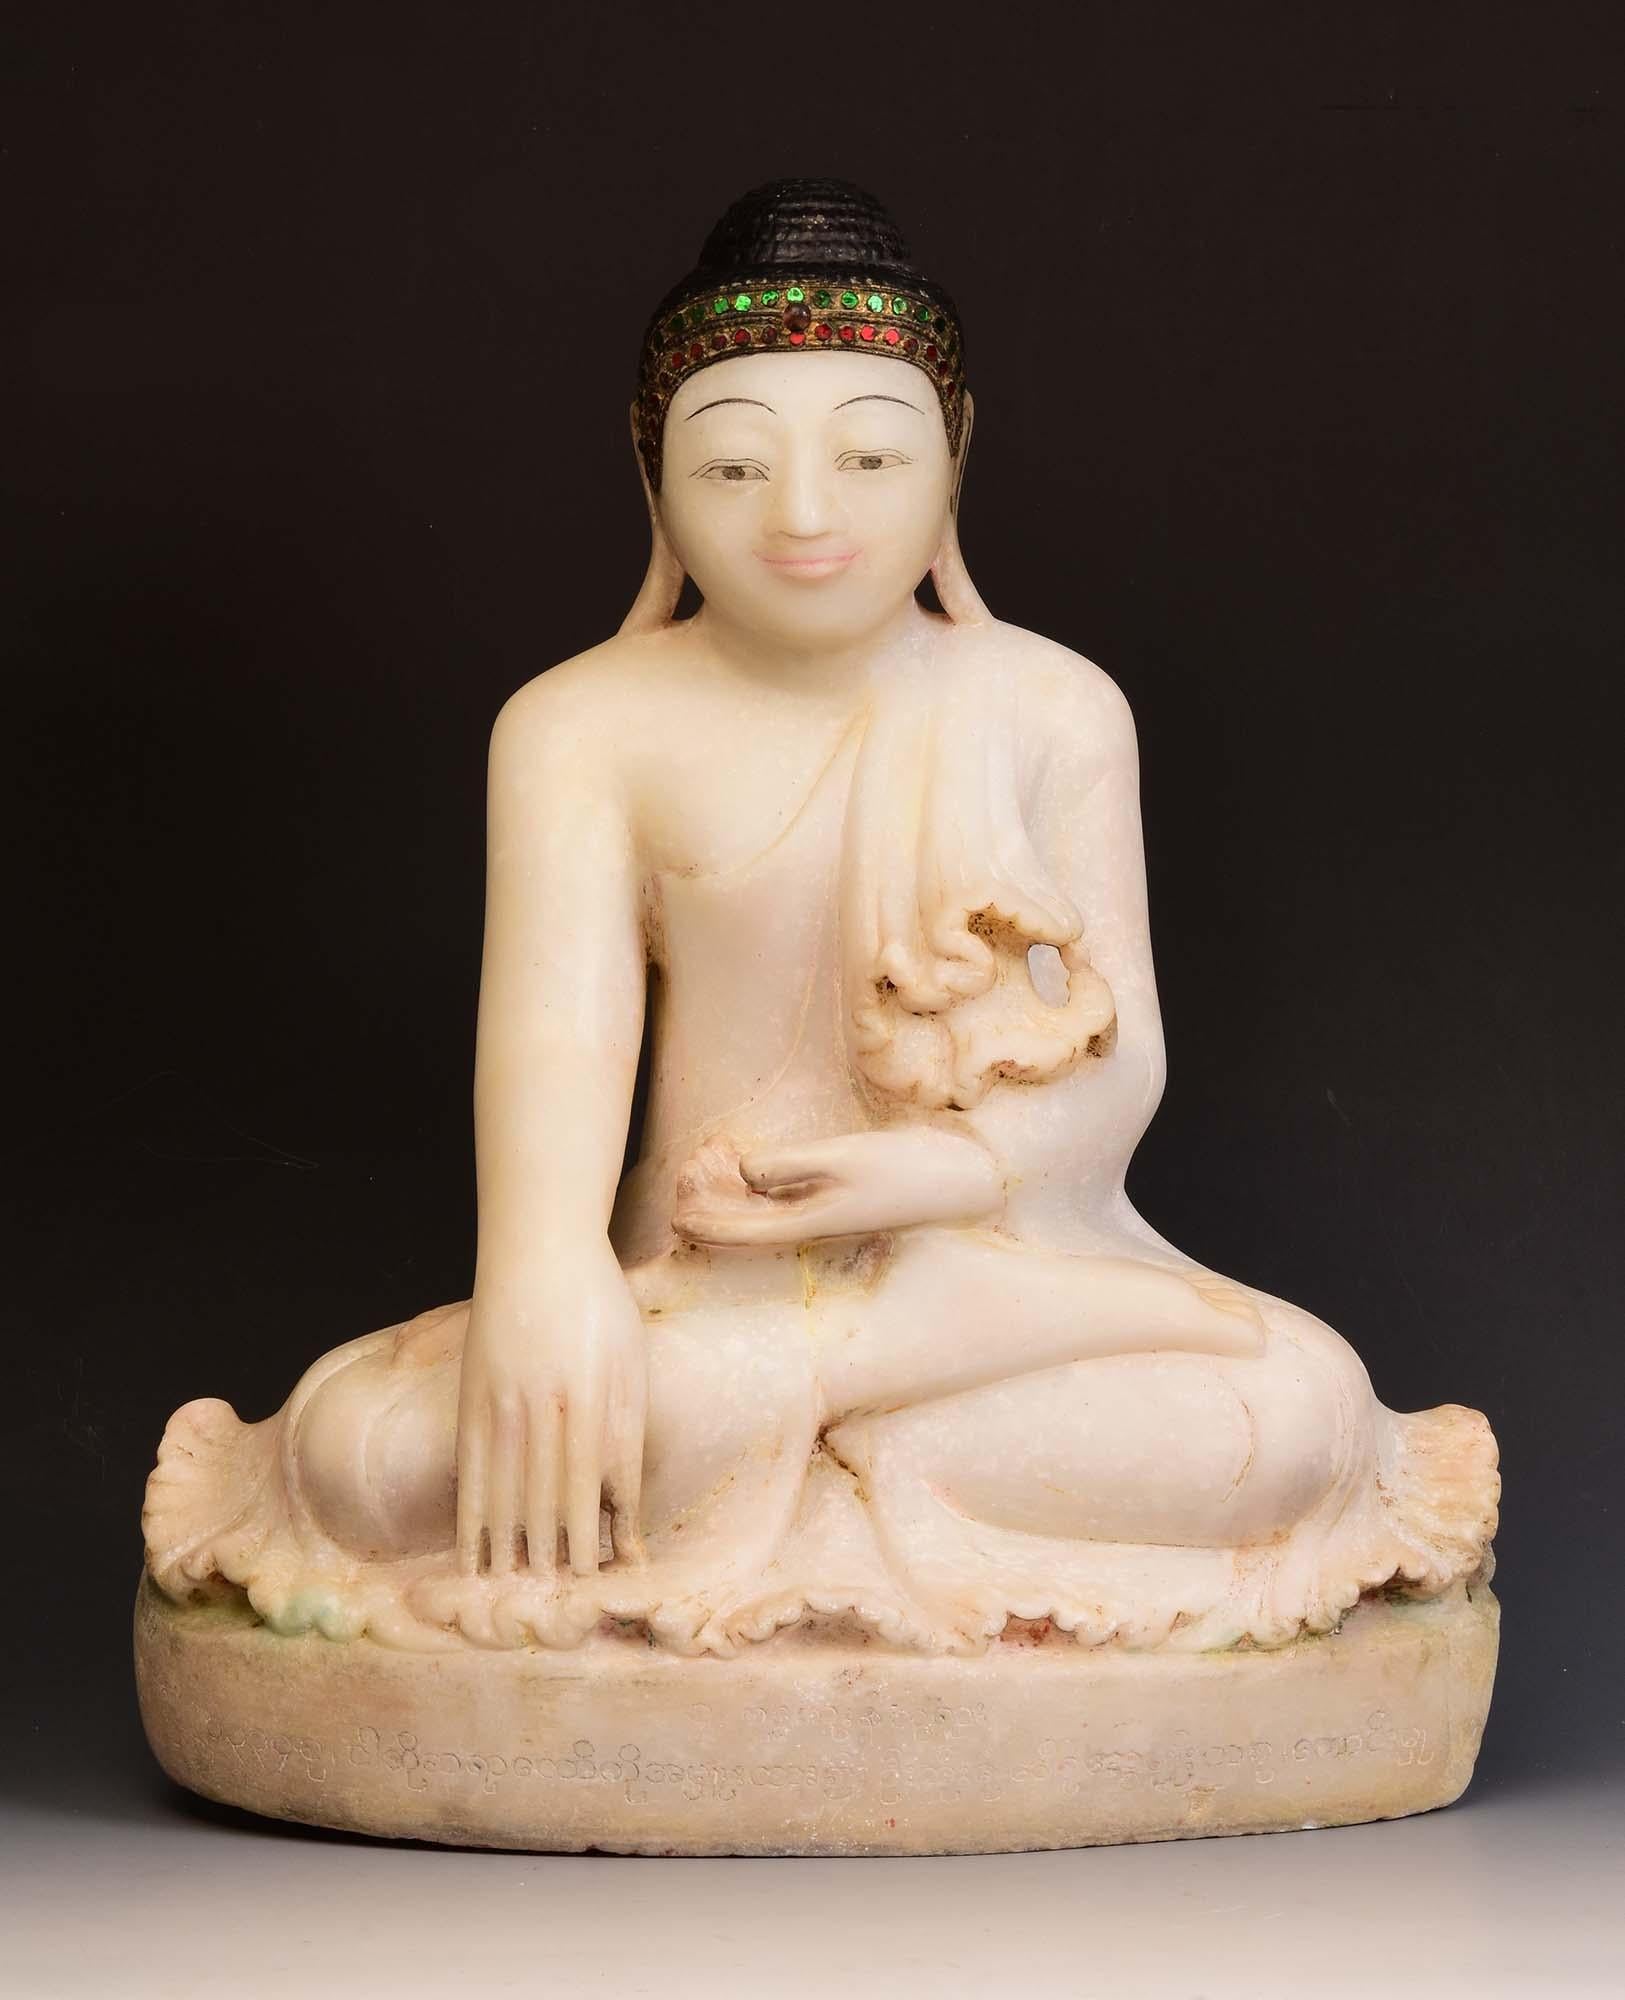 Antique Burmese alabaster Buddha sitting in Mara Vijaya (calling the earth to witness) posture on a base, with inlay of colorful glass pieces on the headband.

Age: Burma, Mandalay Period, 19th Century
Size: Height 51 C.M. / Width 42 C.M. / Depth